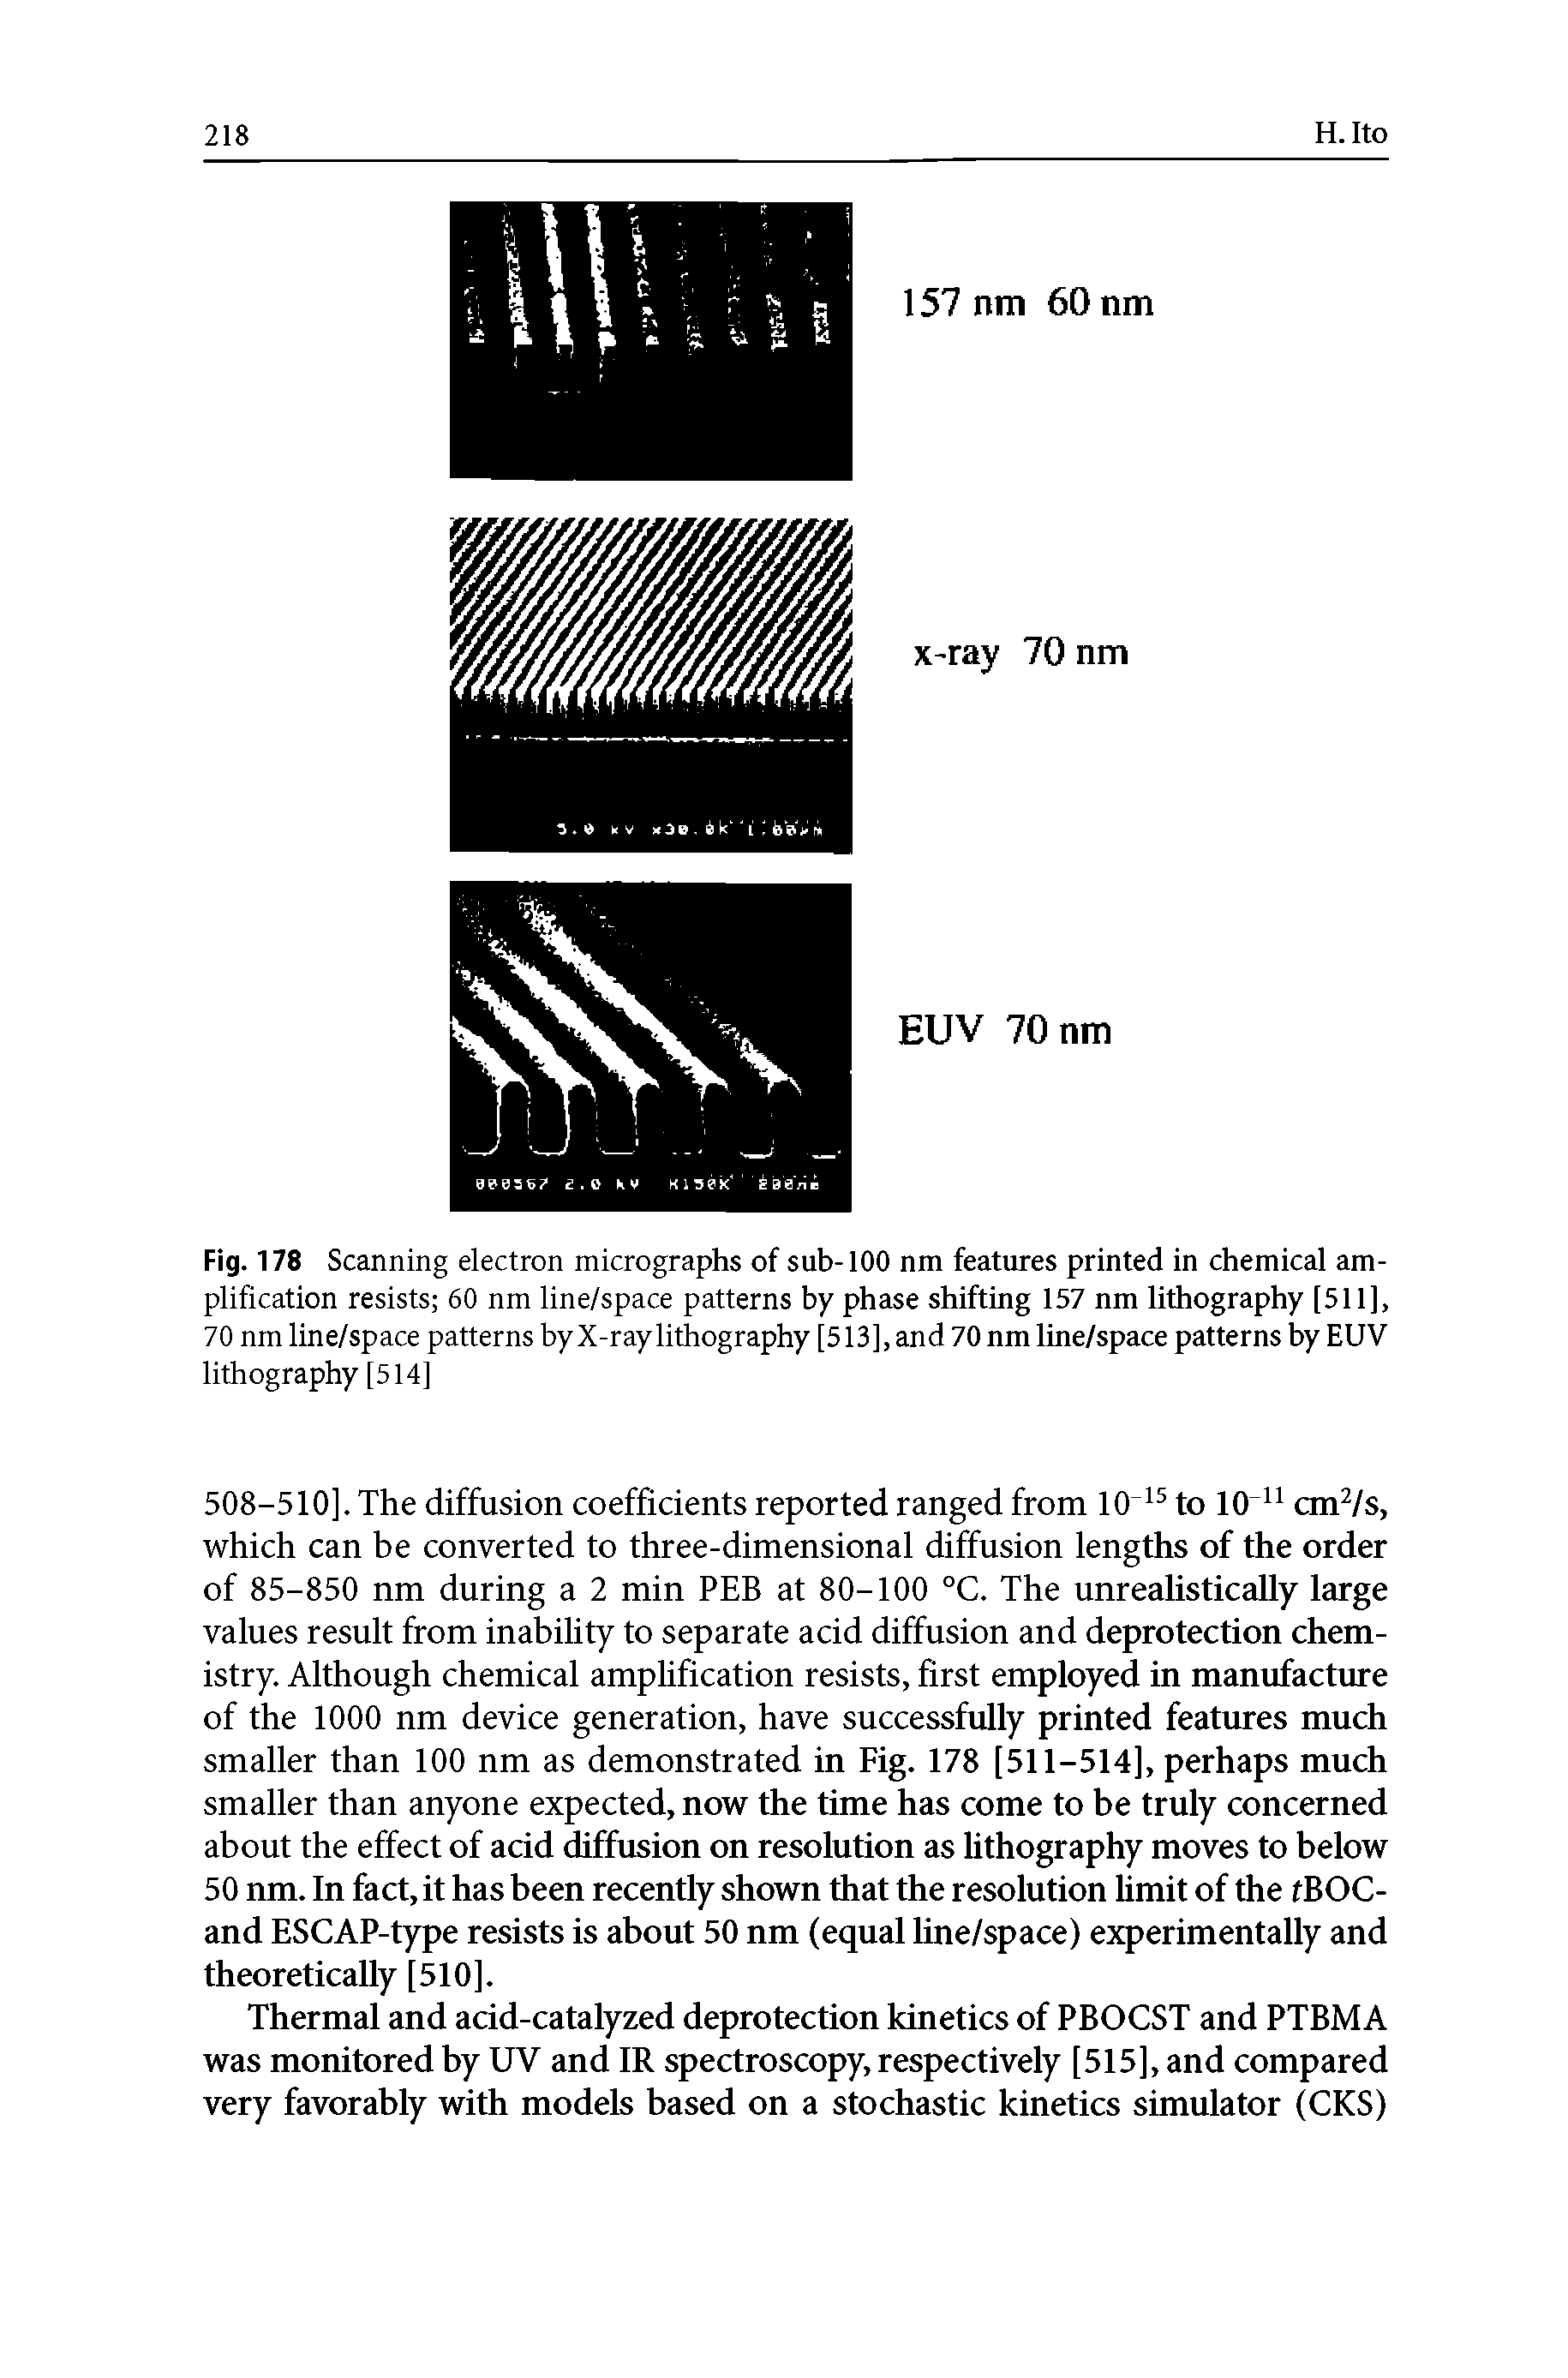 Fig. 178 Scanning electron micrographs of sub-100 nm features printed in chemical amplification resists 60 nm line/space patterns by phase shifting 157 nm lithography [511], 70 nm line/space patterns by X-ray lithography [513], and 70 nm line/space patterns by EUV lithography [514]...